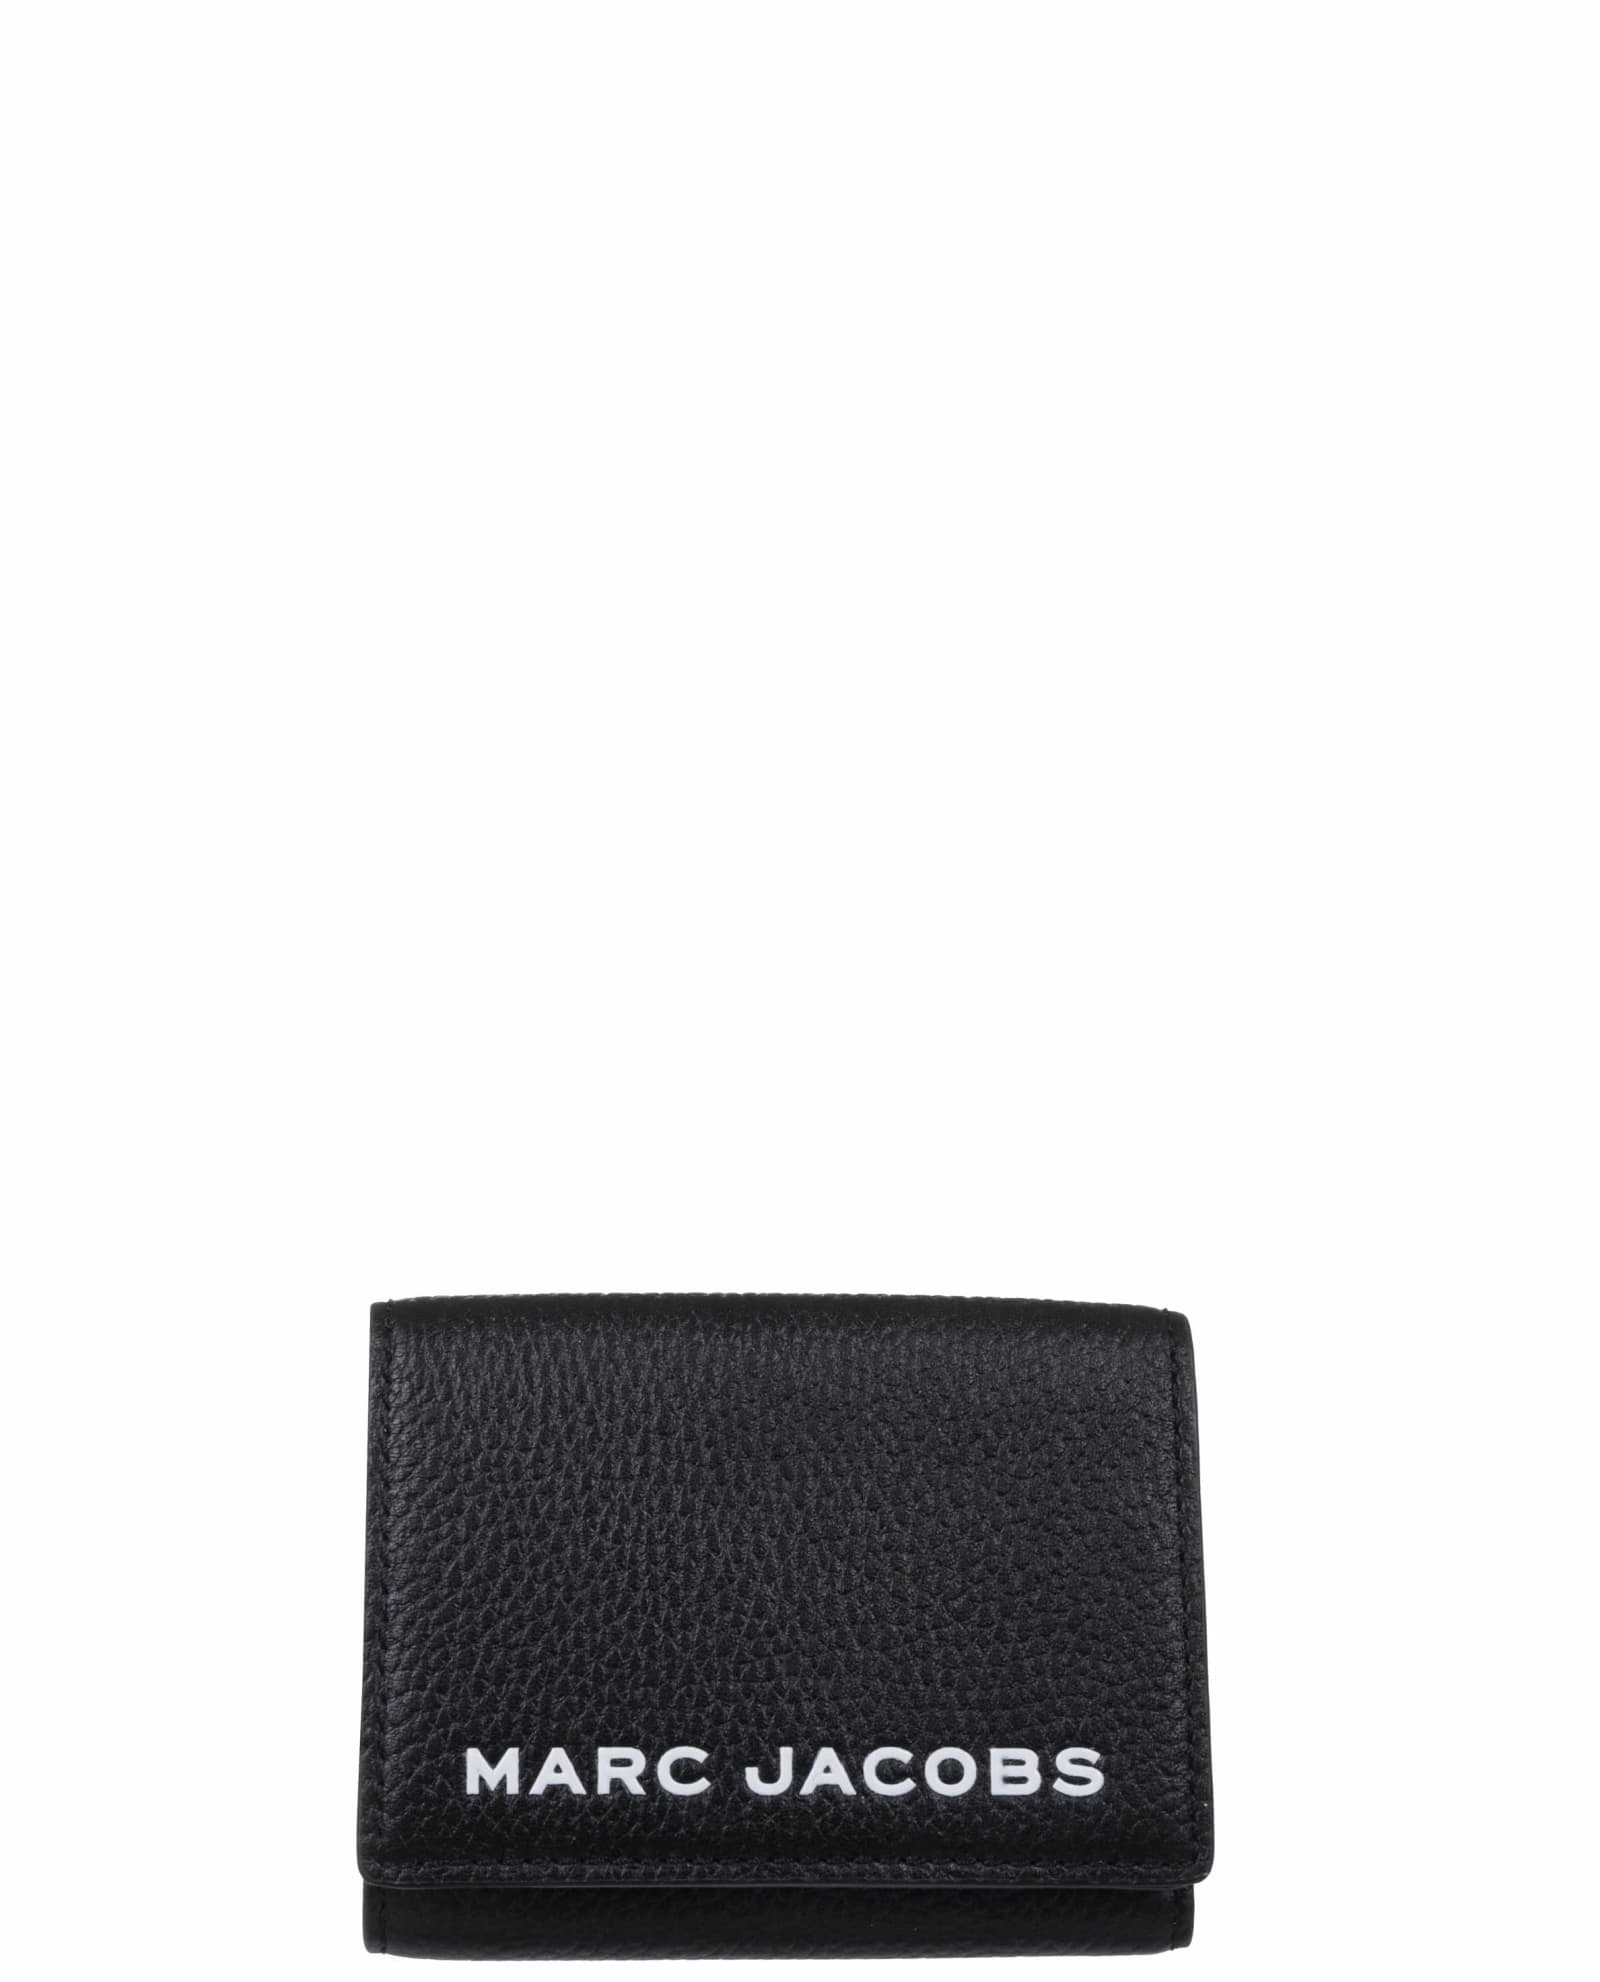 The Marc Jacobs Black Trifold Wallet M